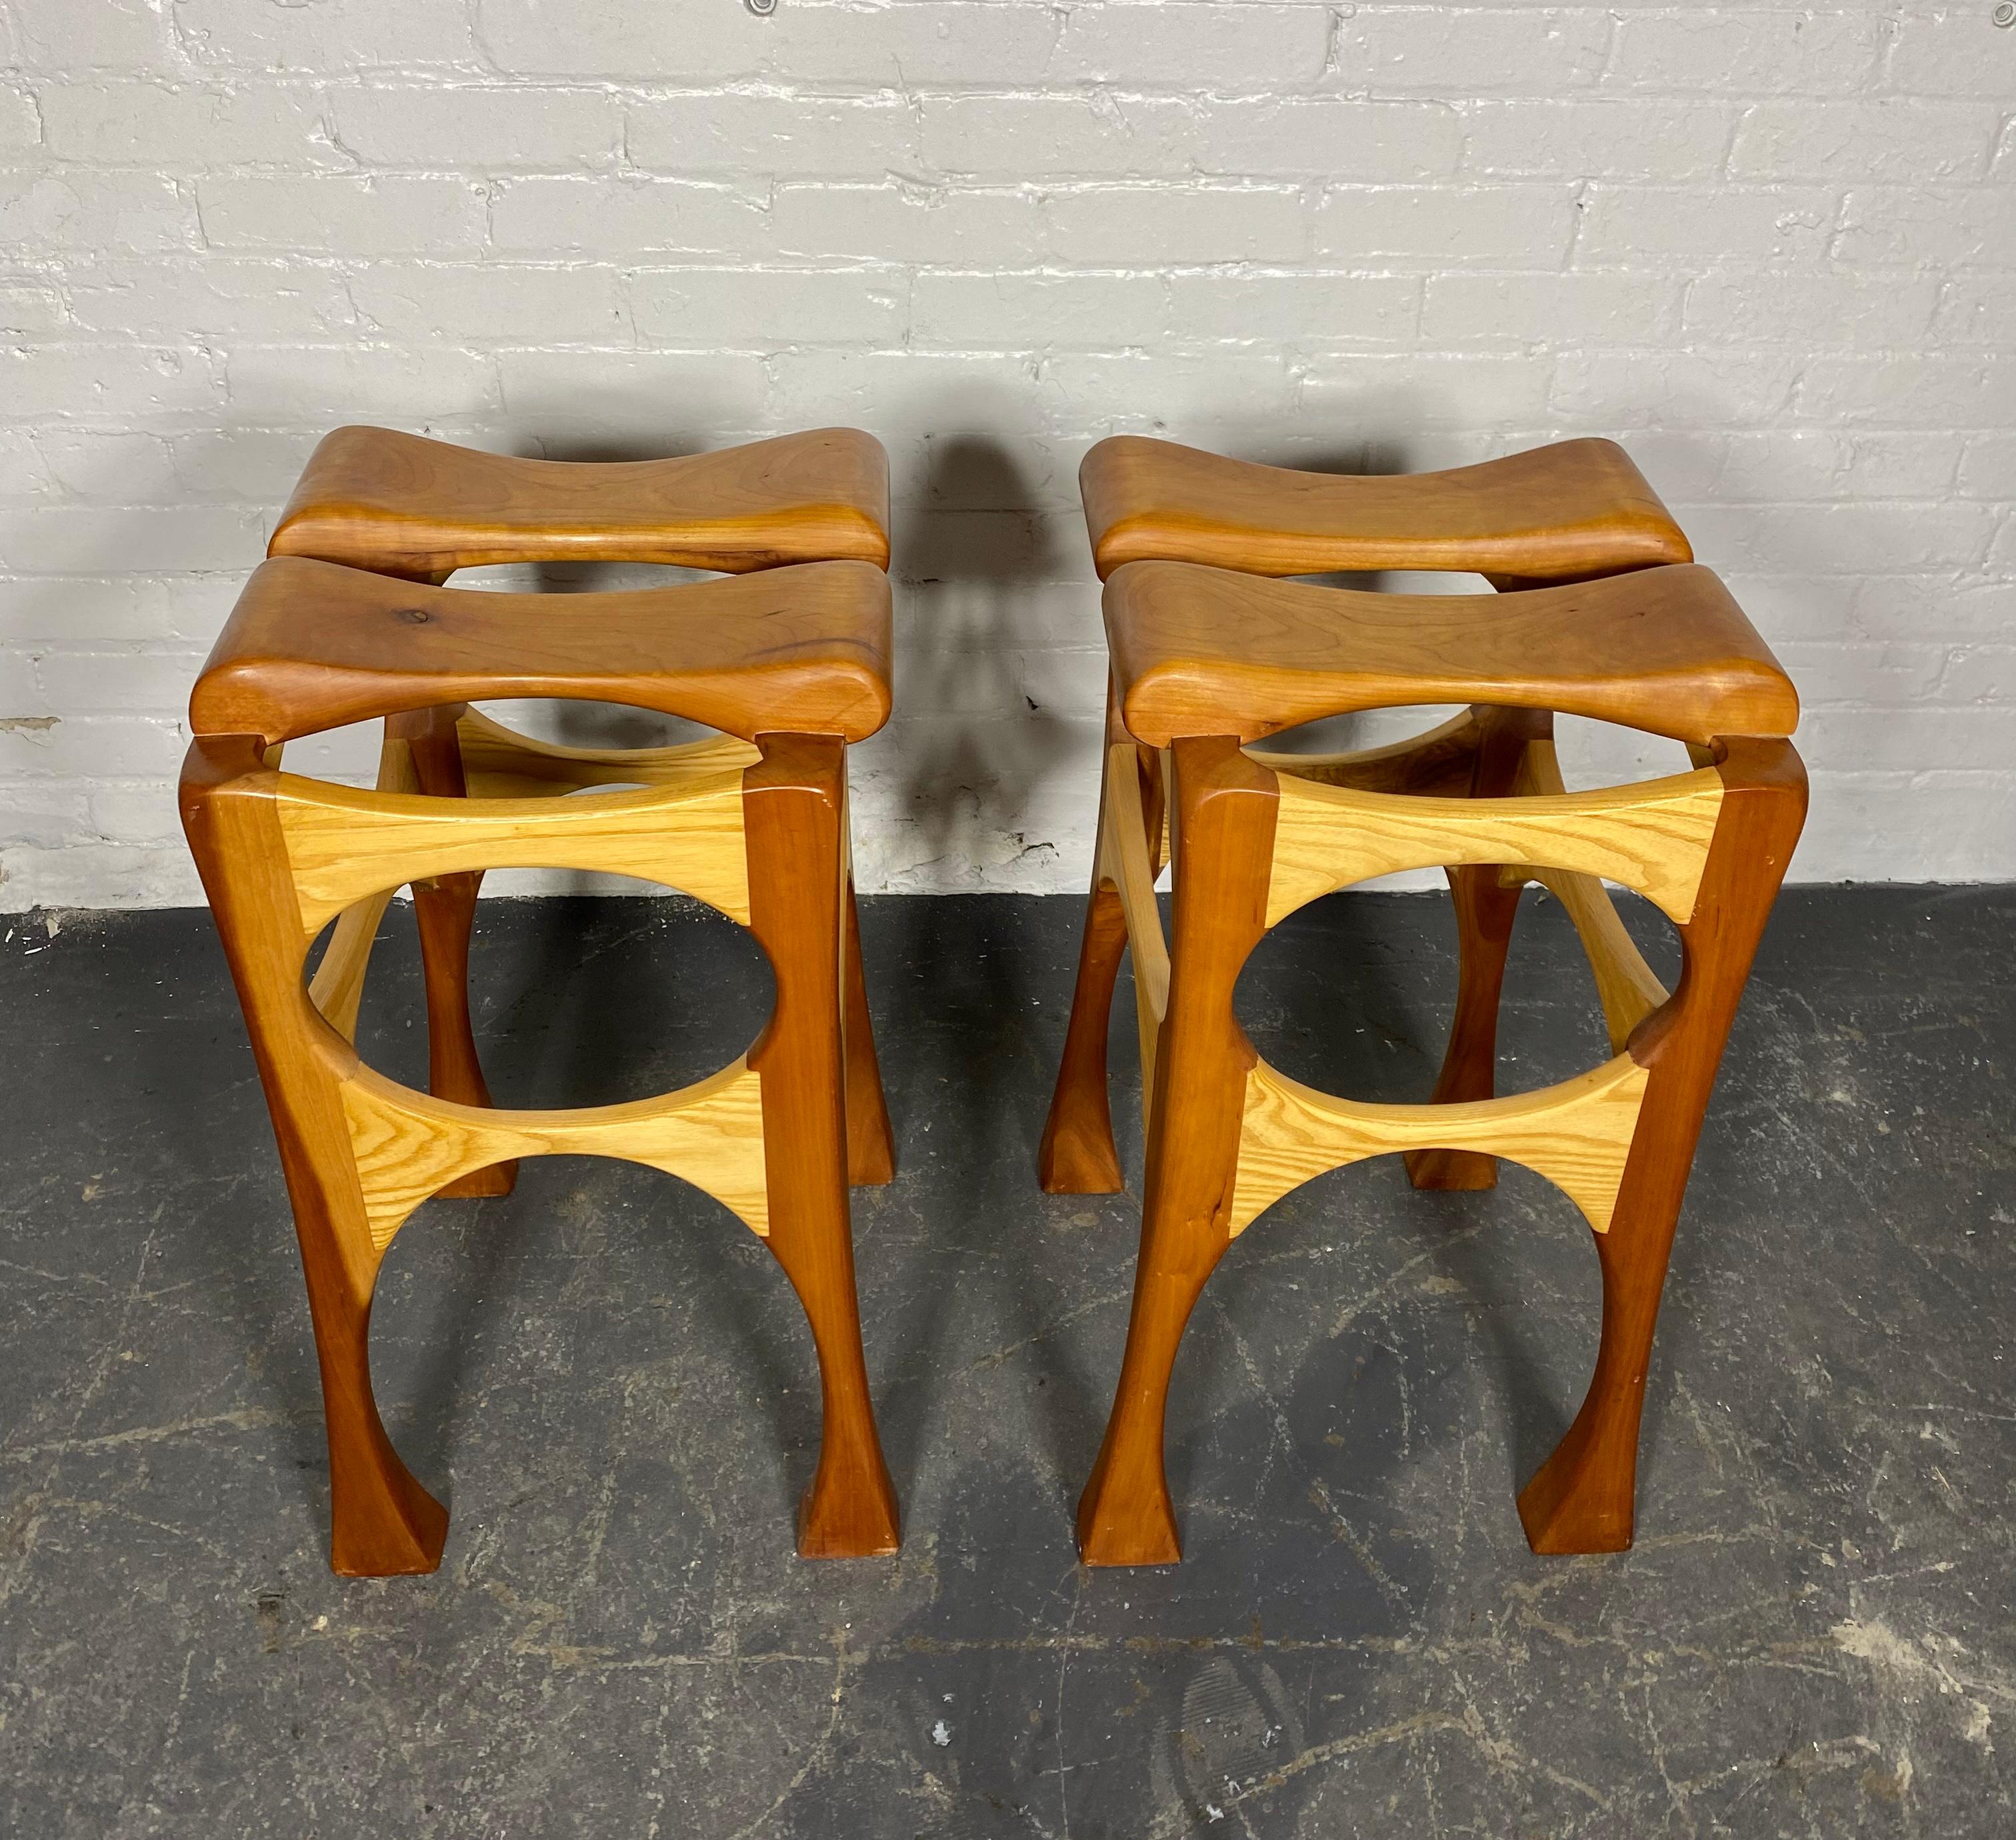 Hand Crafted Bespoke Workshop/Studio Stools.  2-tone birch and cherry  For Sale 1